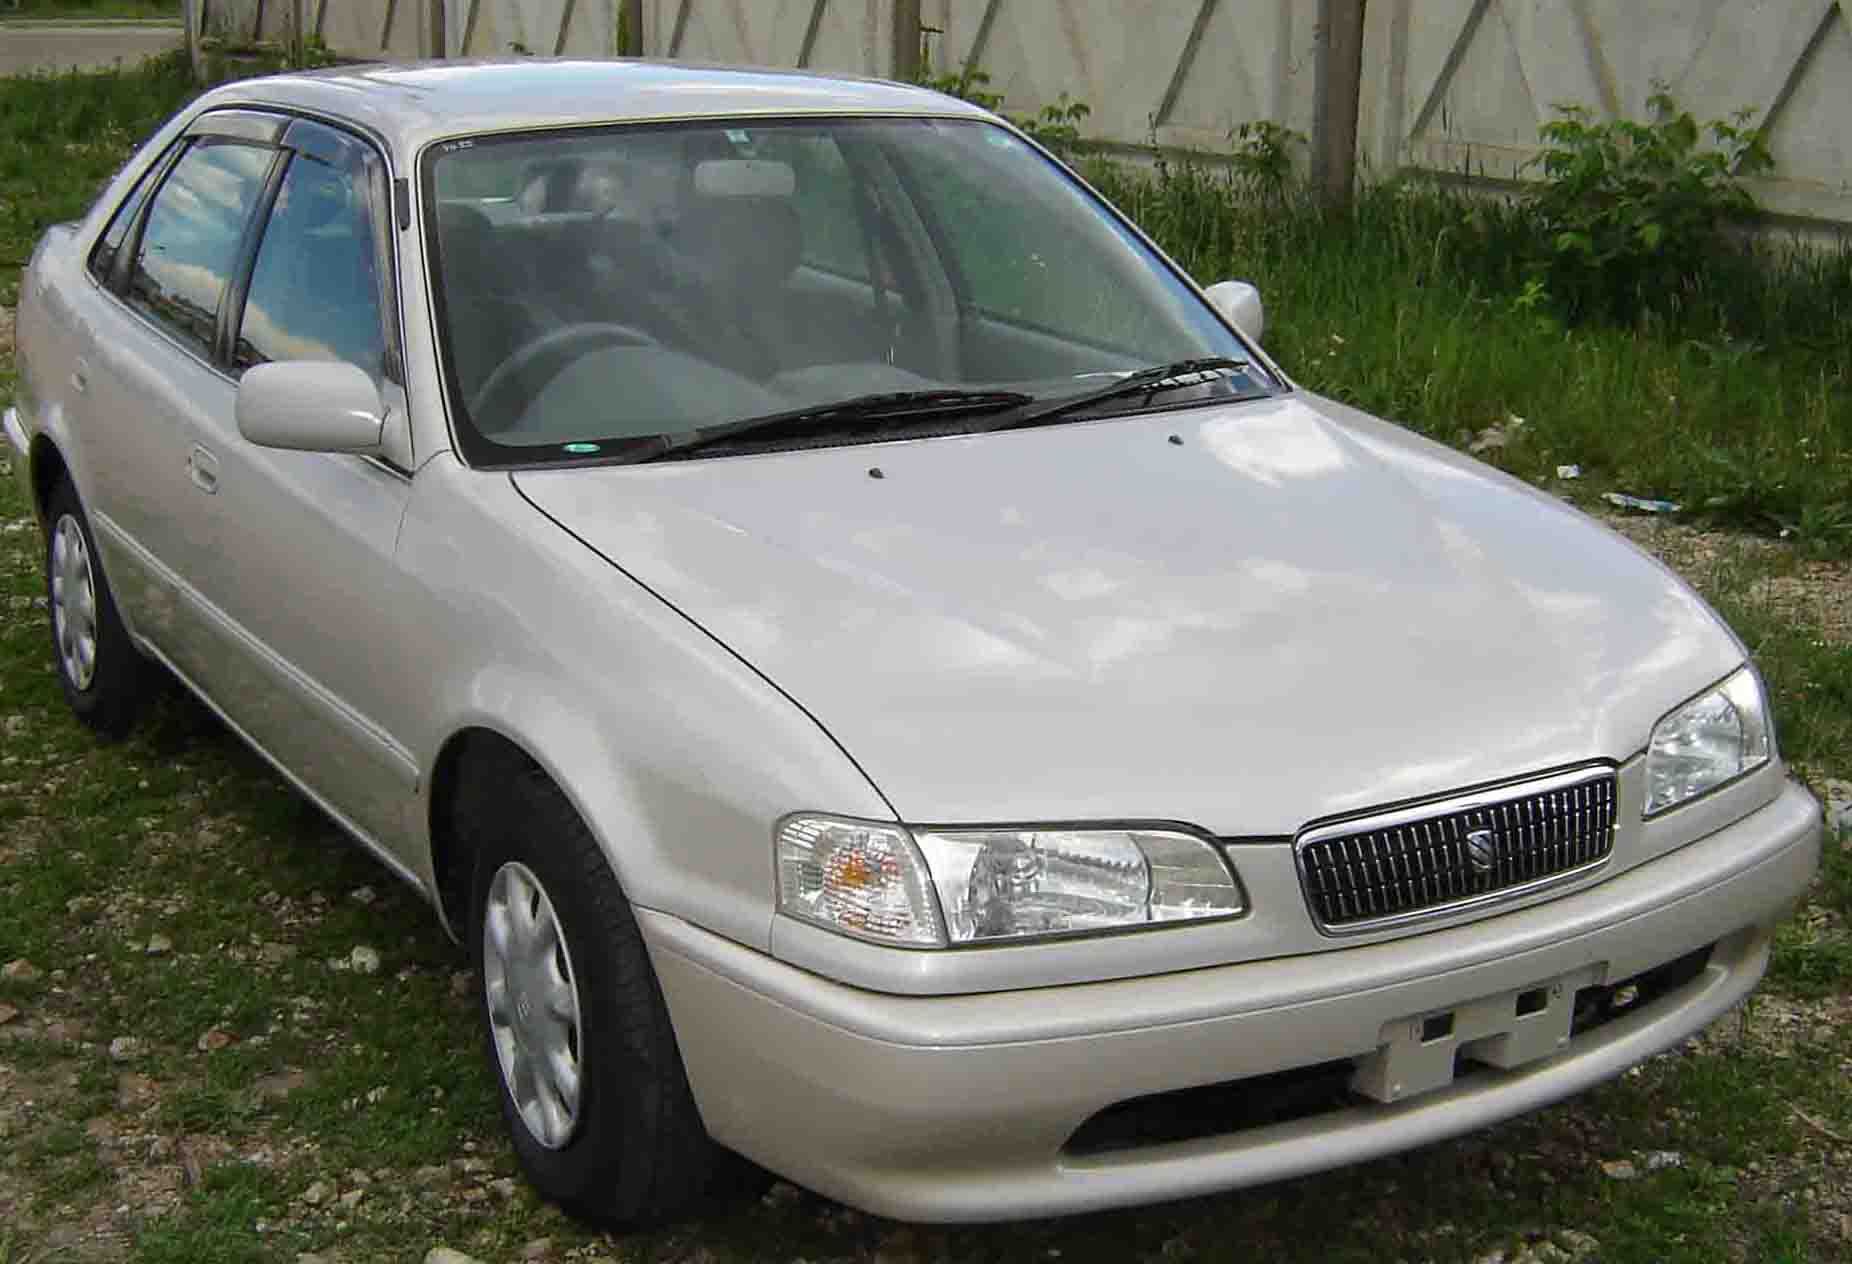 1995 Toyota Corolla Wiring Diagram from www.cars-directory.net